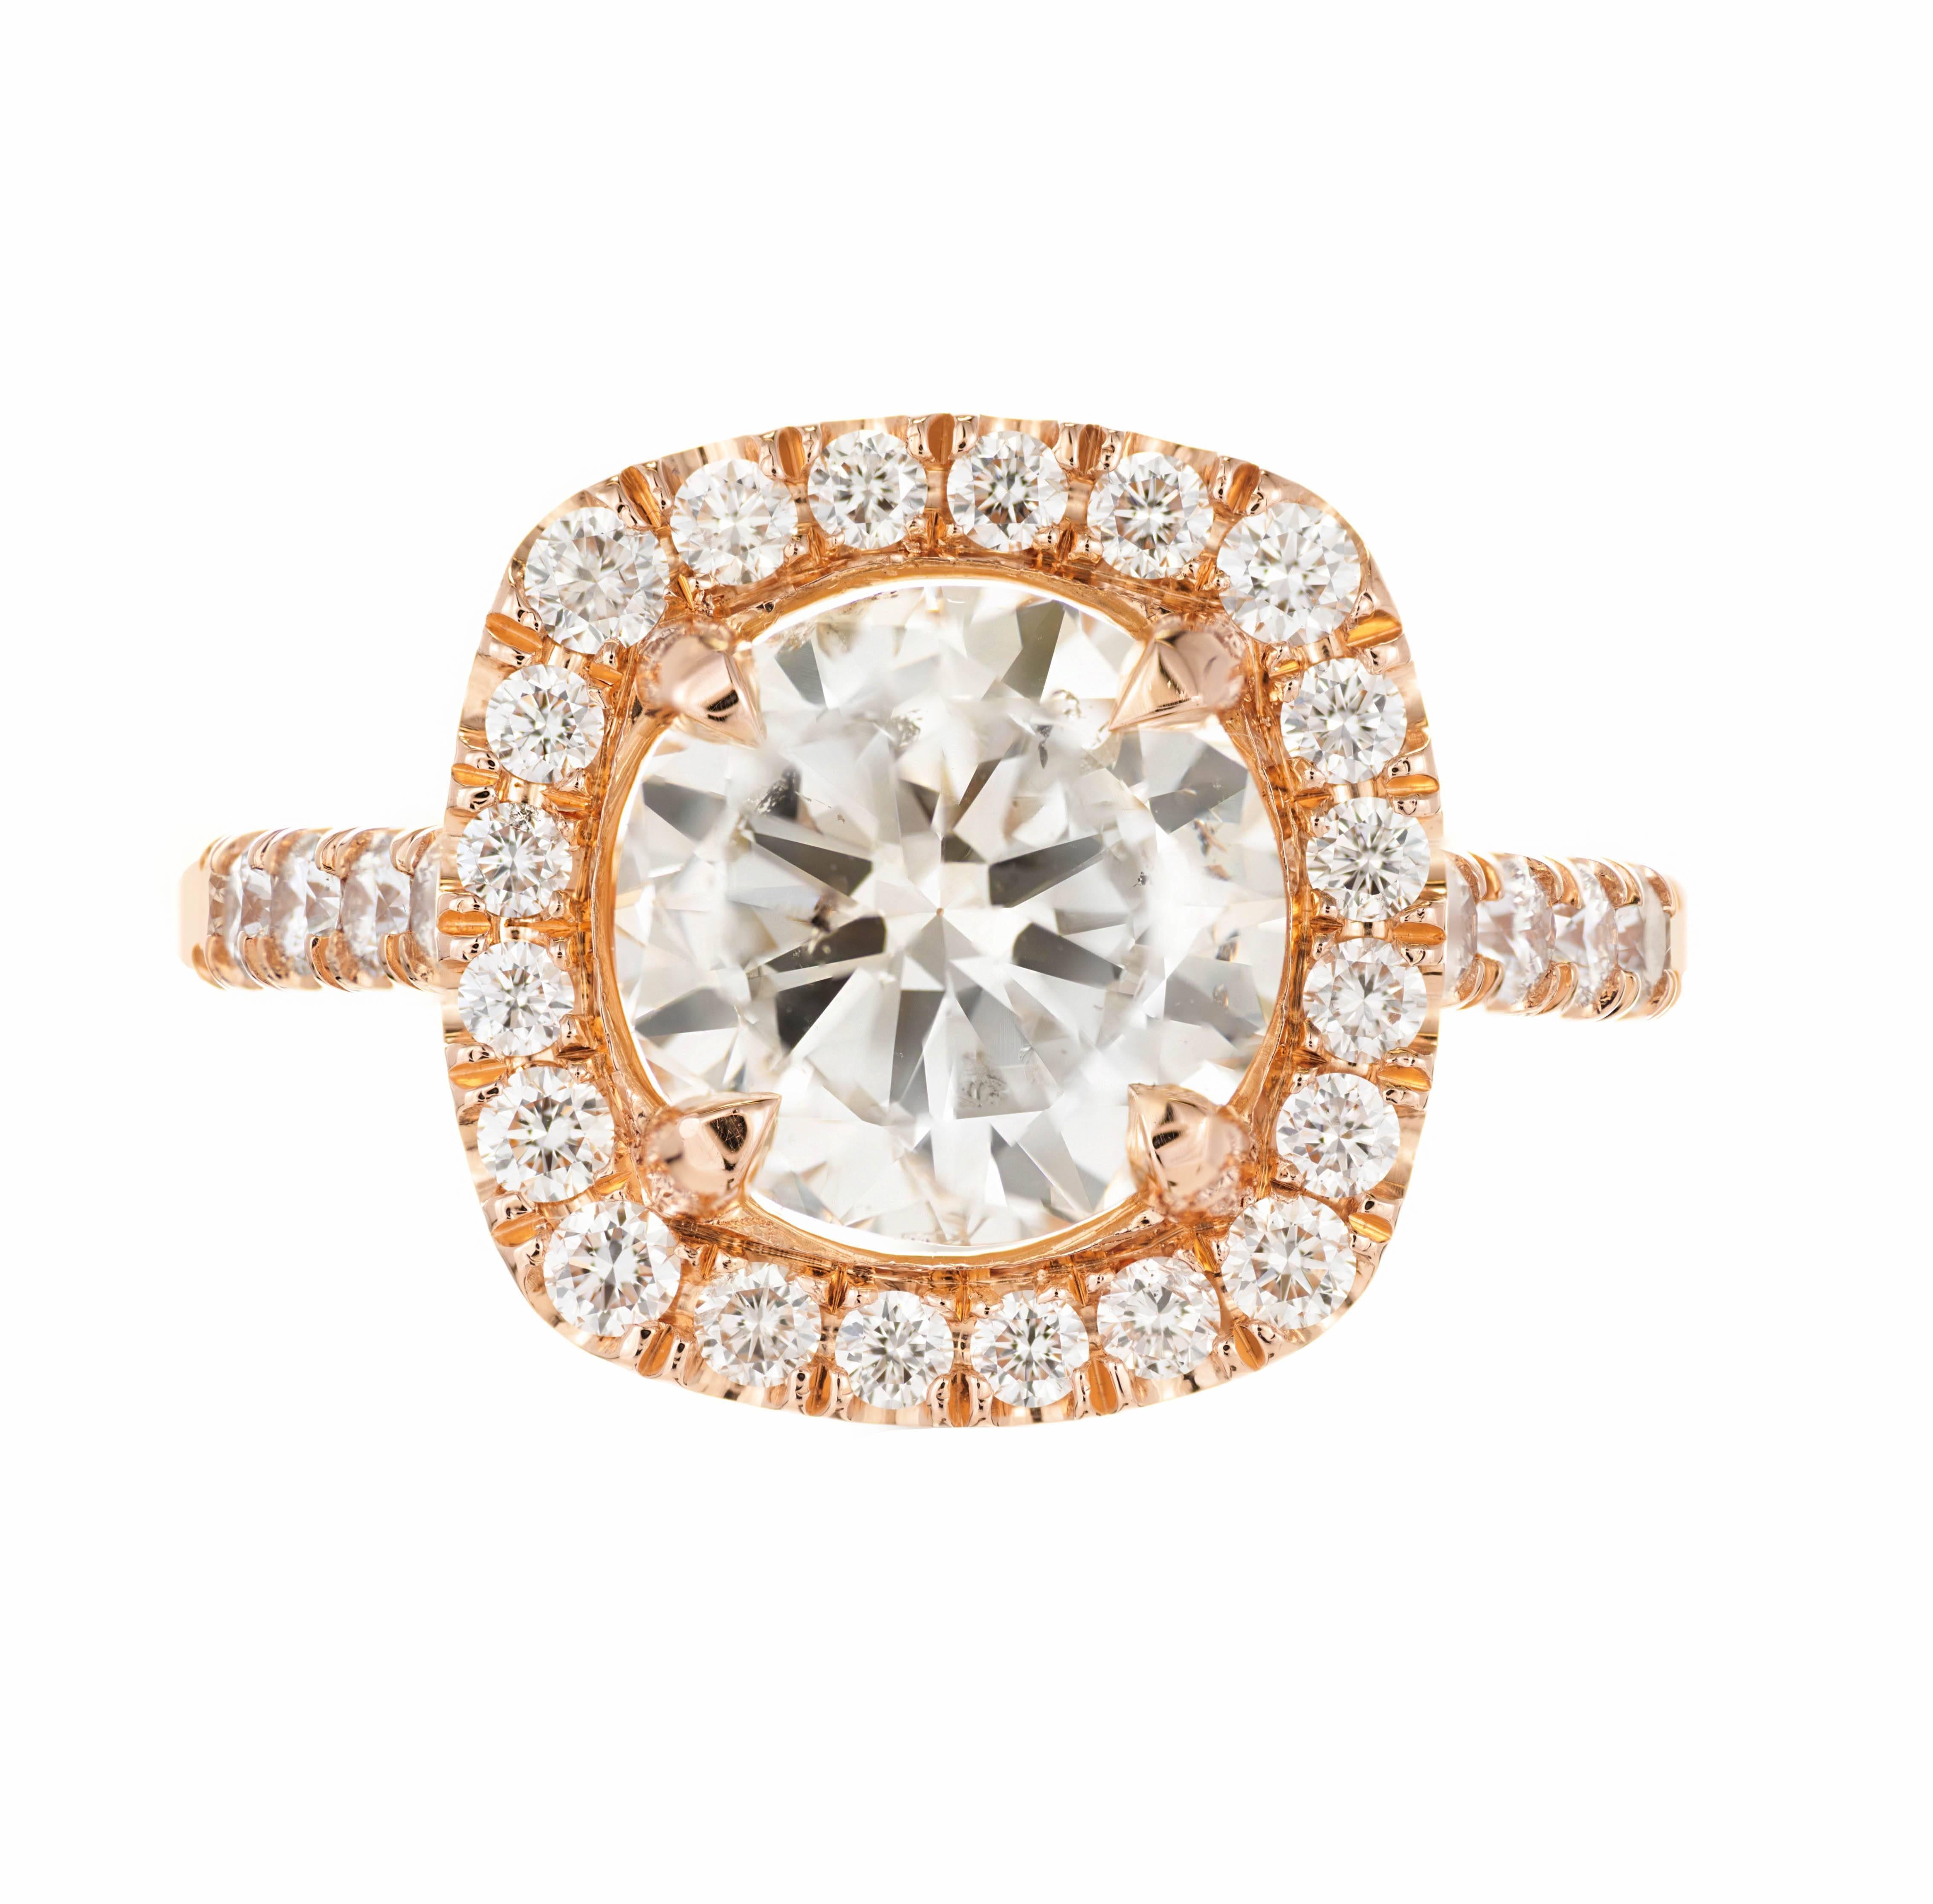 3.04ct transitional Ideal cut diamond halo engagement ring. Slight warm color K that, great sparkle and surface area, no flaws visible to the eye. 18k rose gold setting with diamonds along the shanks. 

1 round brilliant cut diamond, approx. total